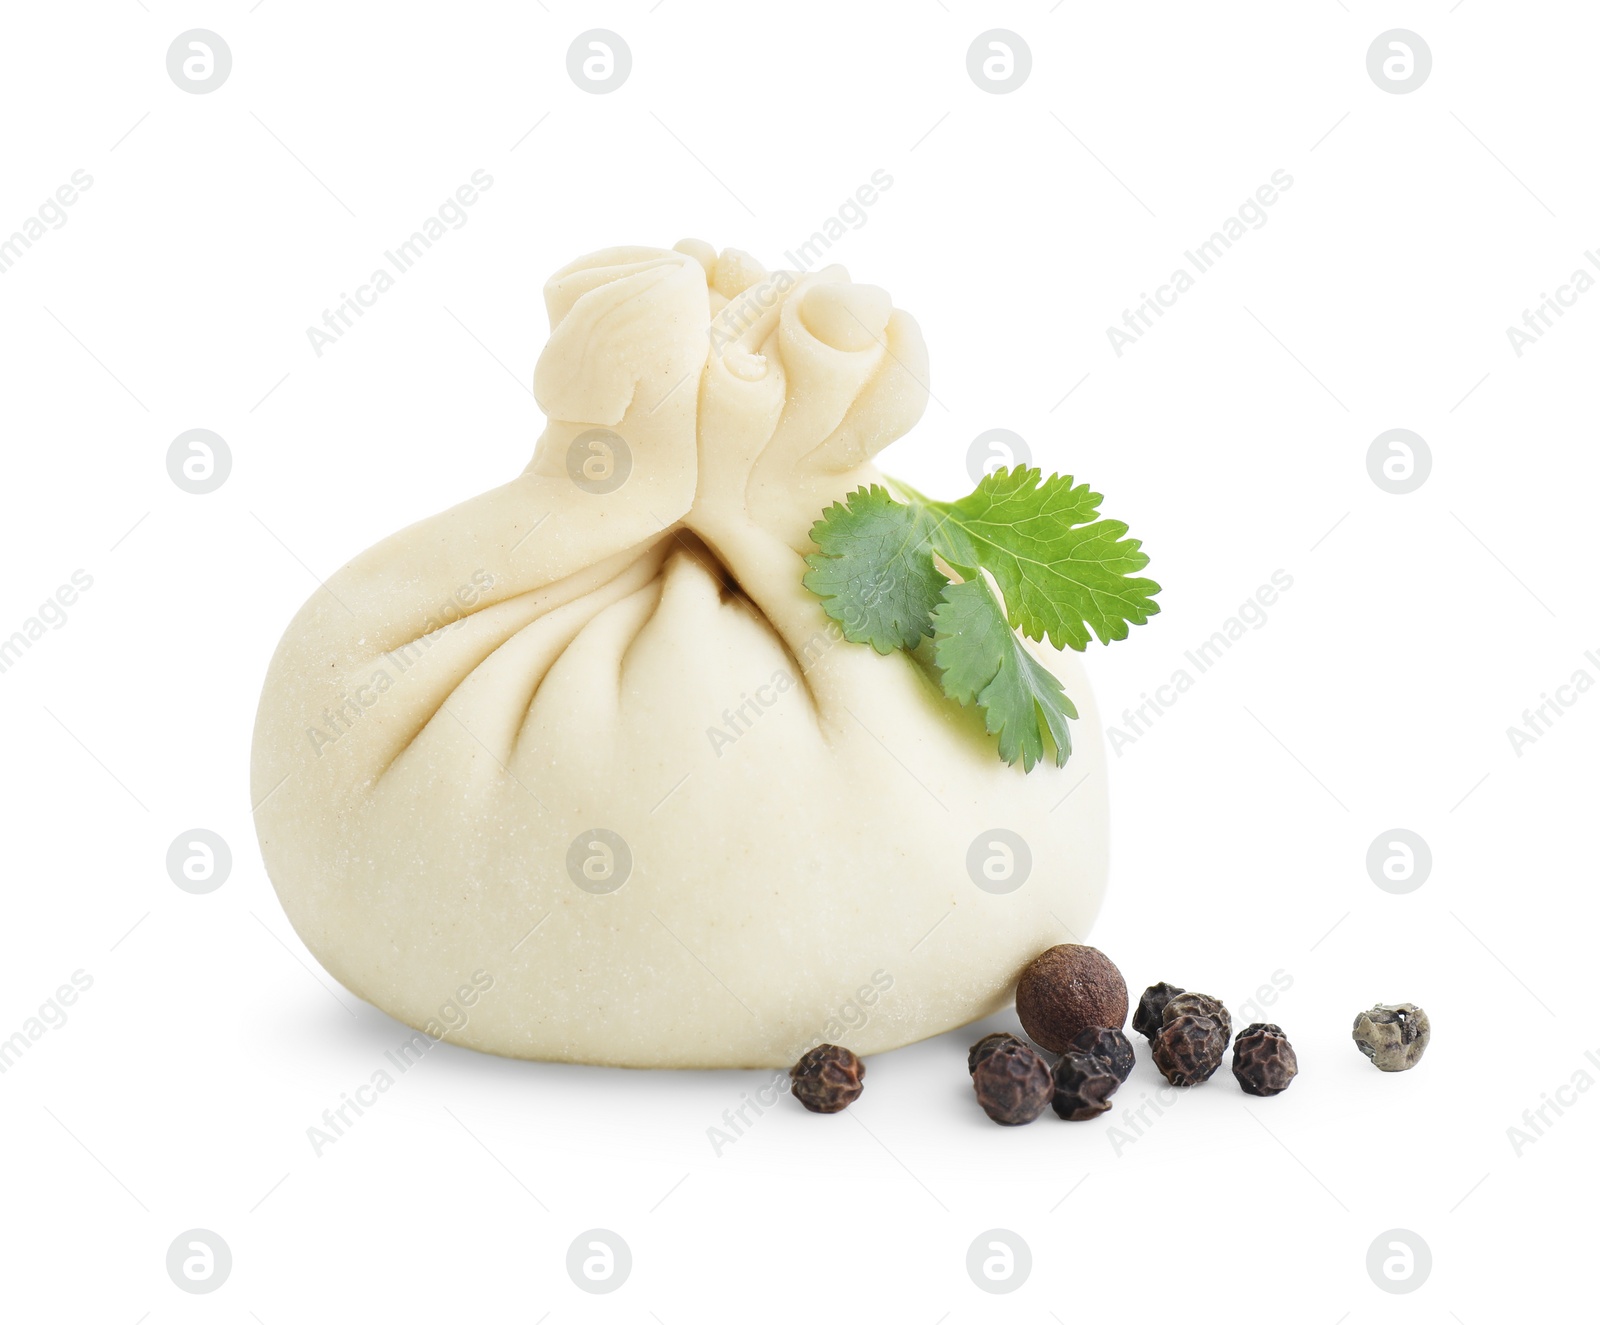 Photo of Uncooked khinkali (dumpling) and spices isolated on white. Georgian cuisine